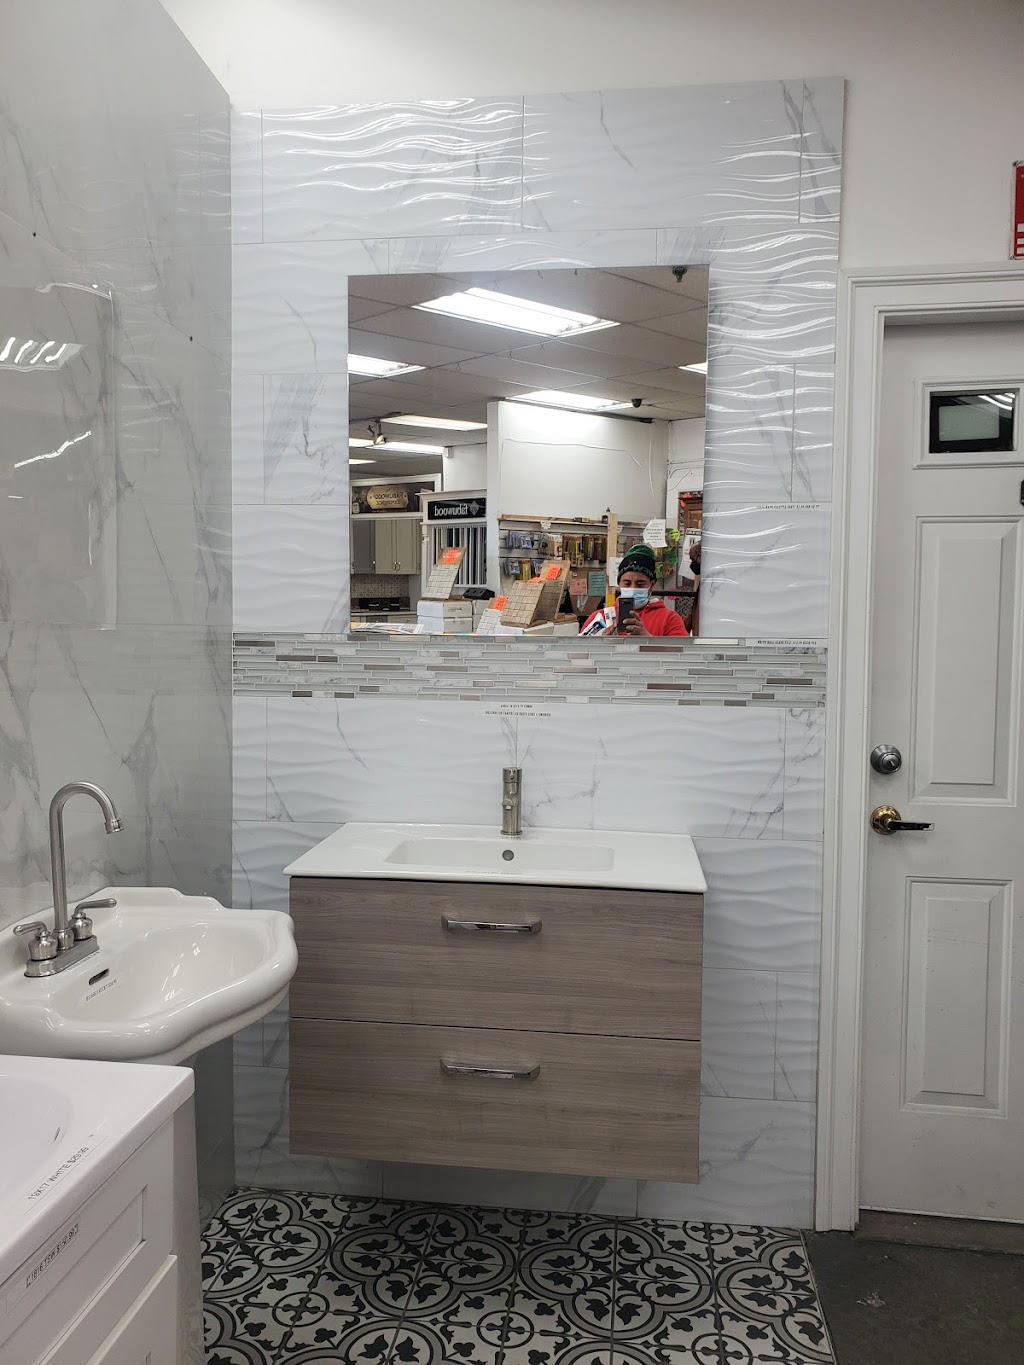 Weisman Home Outlets - Kitchen & Bathroom Cabinets | 218-01 Merrick Blvd, Springfield Gardens, NY 11413 | Phone: (718) 723-4000